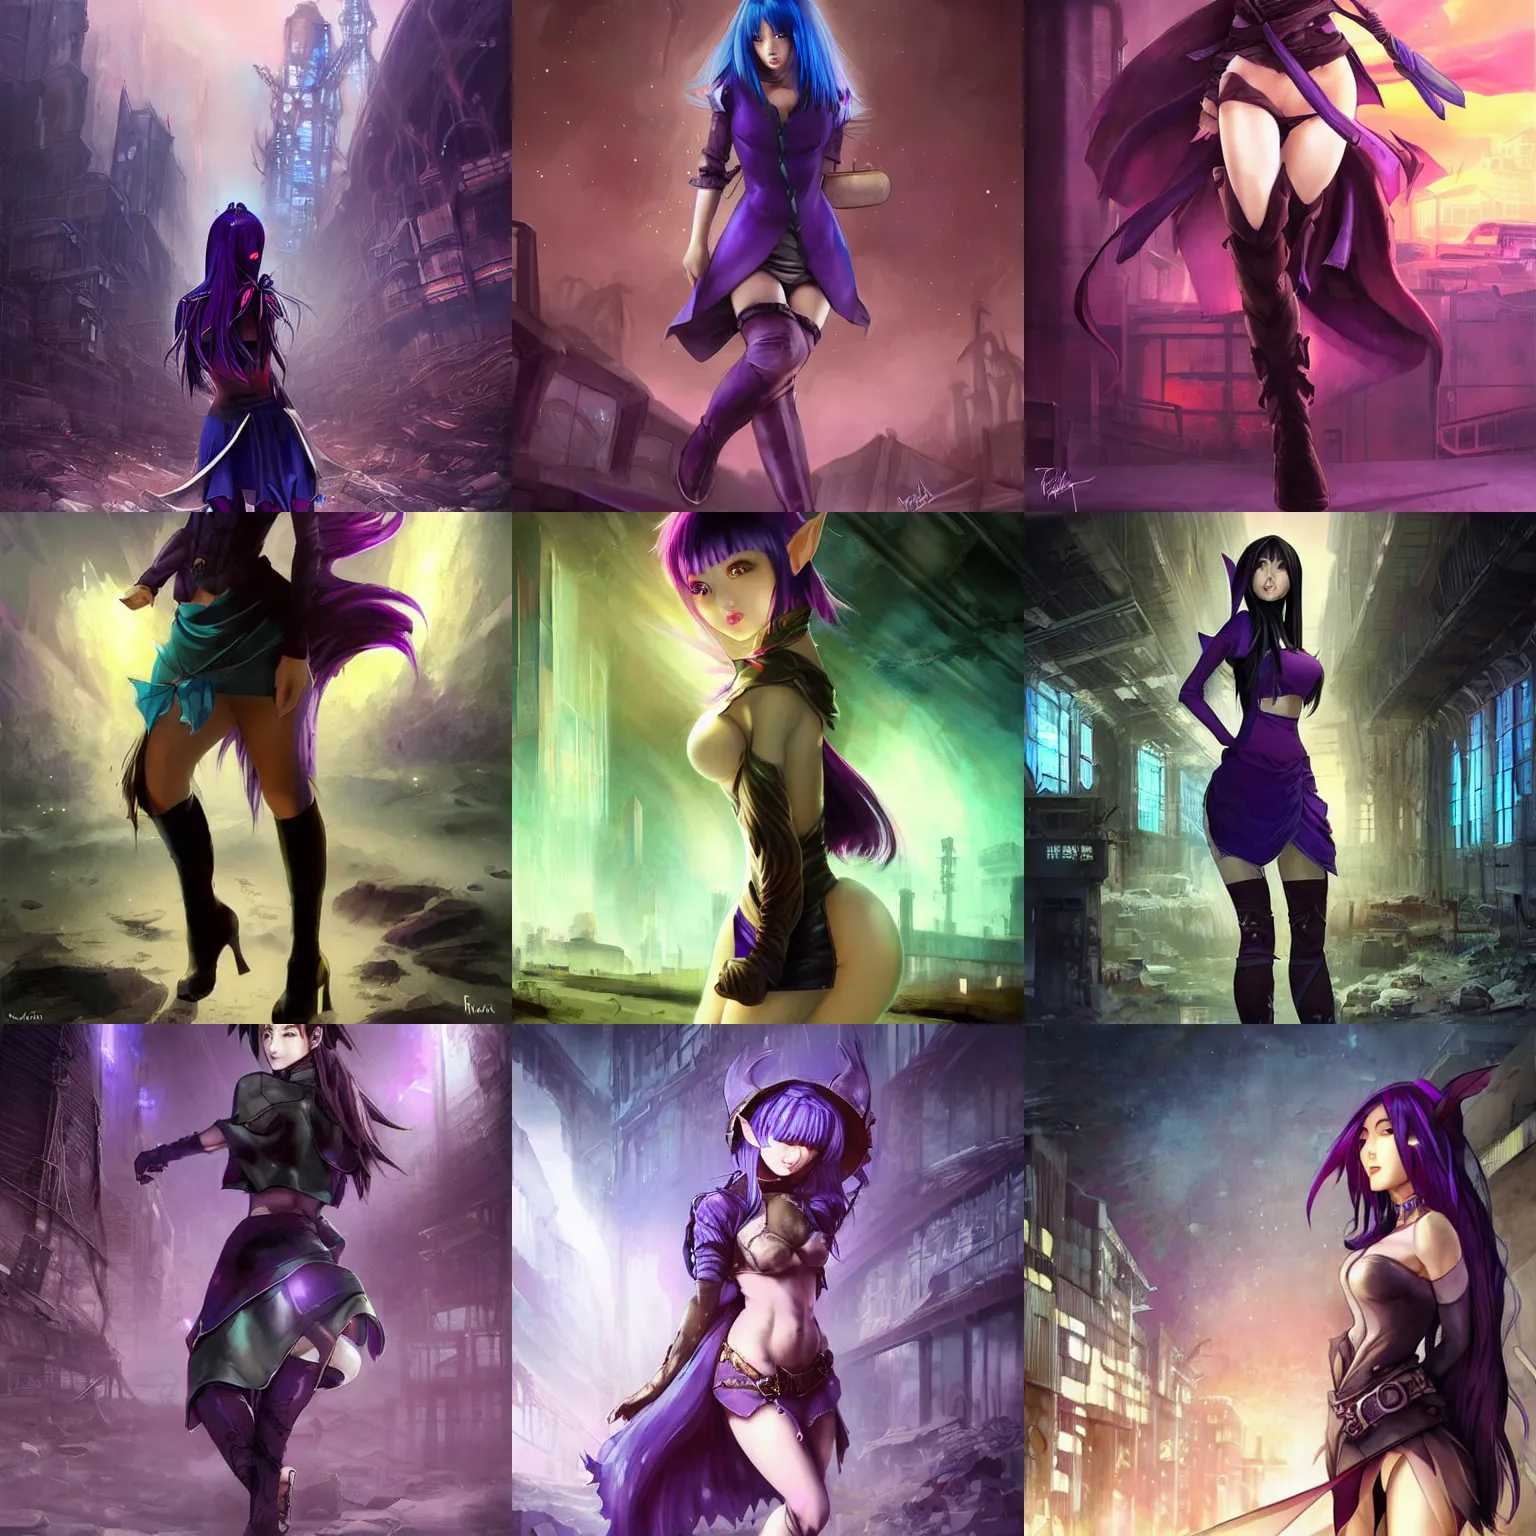 Prompt: stunning, breathtaking, awe-inspiring award-winning artwork of an attractive young asian elf woman with pointy ears and blue hair, wearing a miniskirt and knee-high boots in an endlessly sprawling desolate abandoned post-apocalyptic industrial city at night, extremely moody purple lighting, by Frank Frazetta, by Artgerm